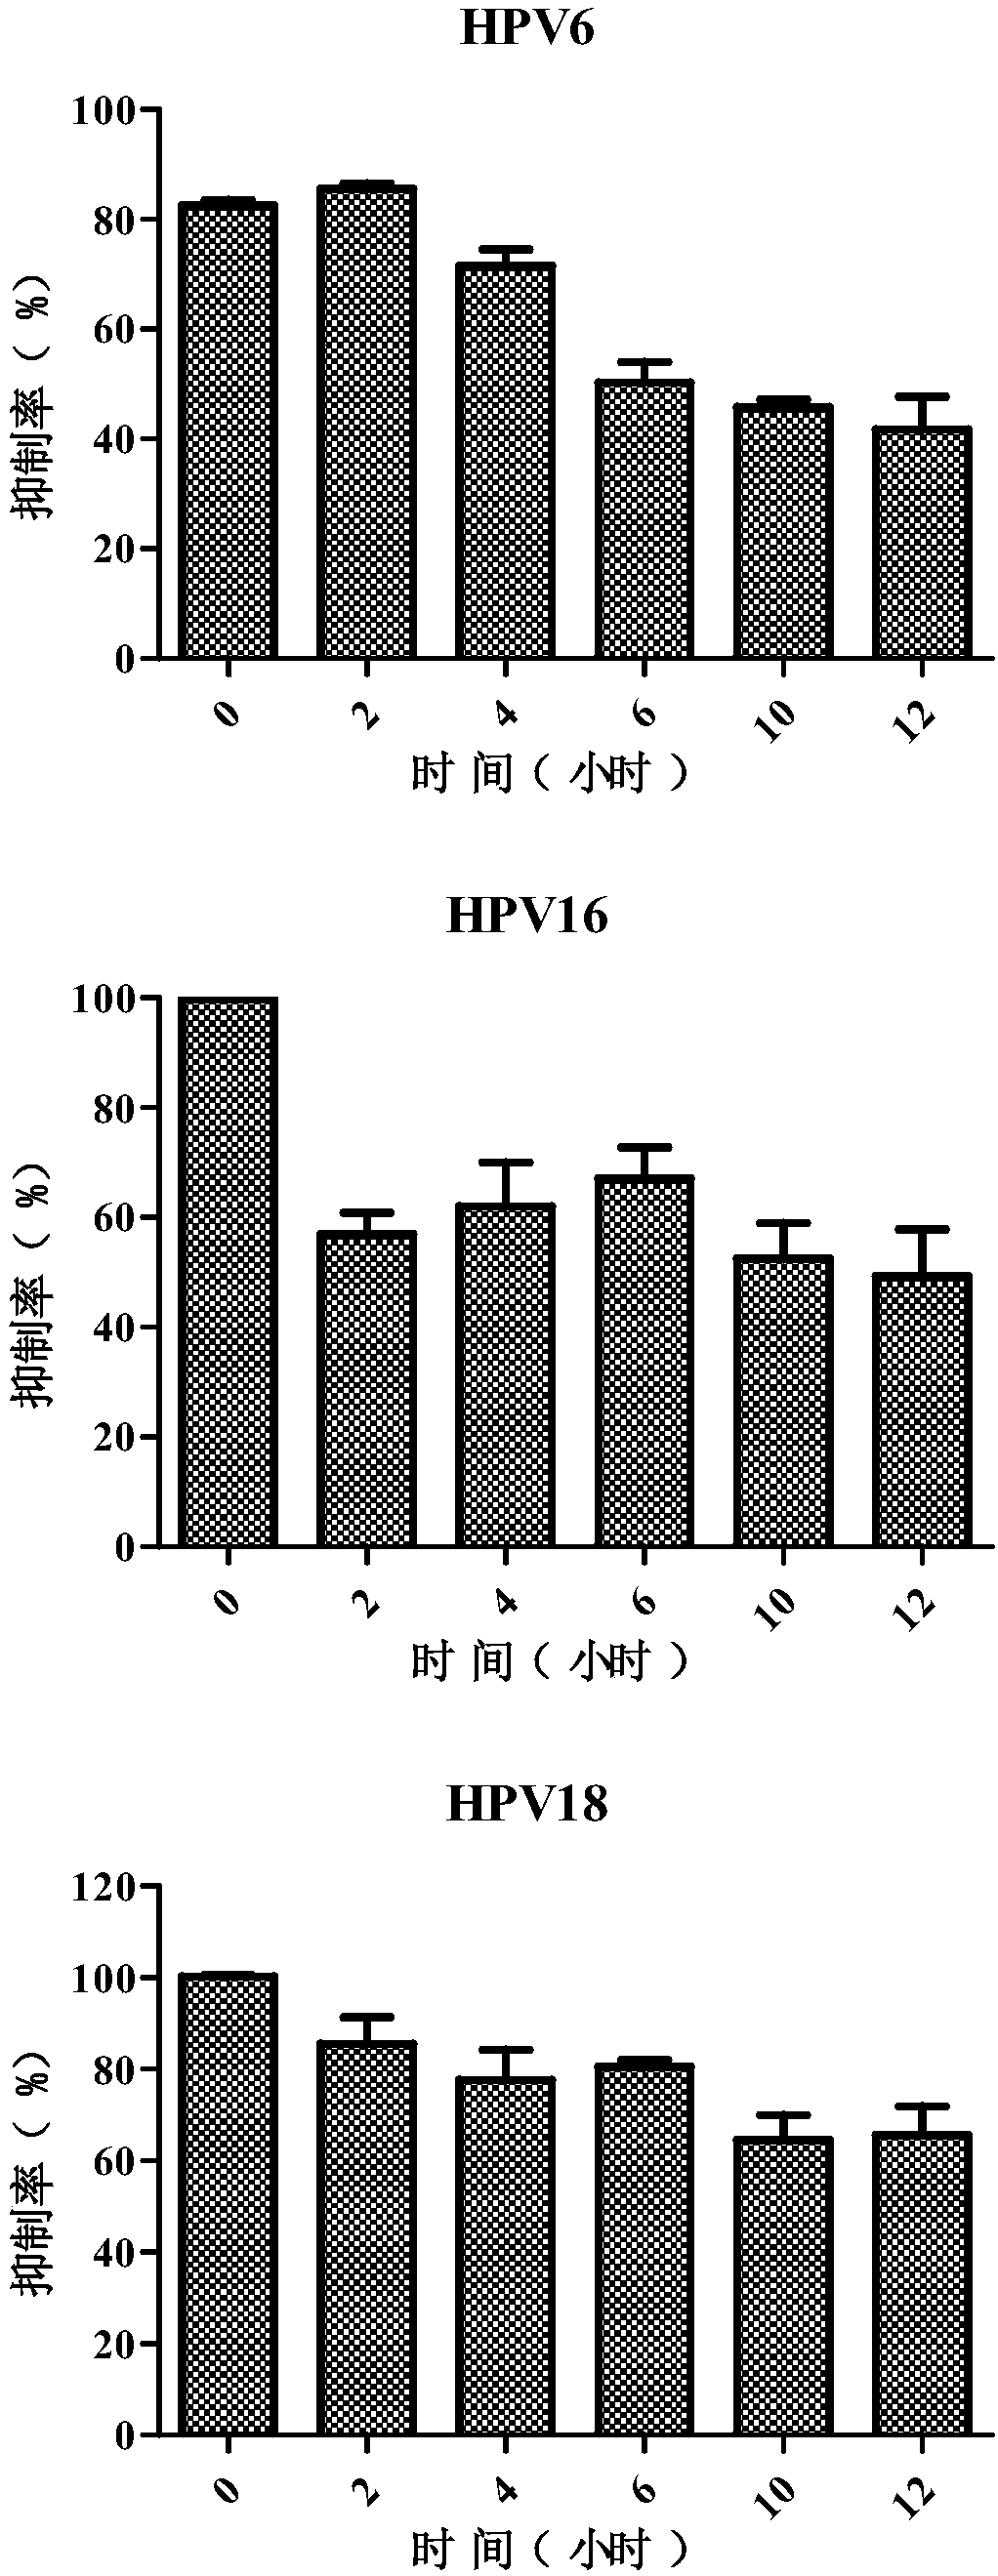 Application of caffeic acid to prepare anti-HPV-virus-infection medicine